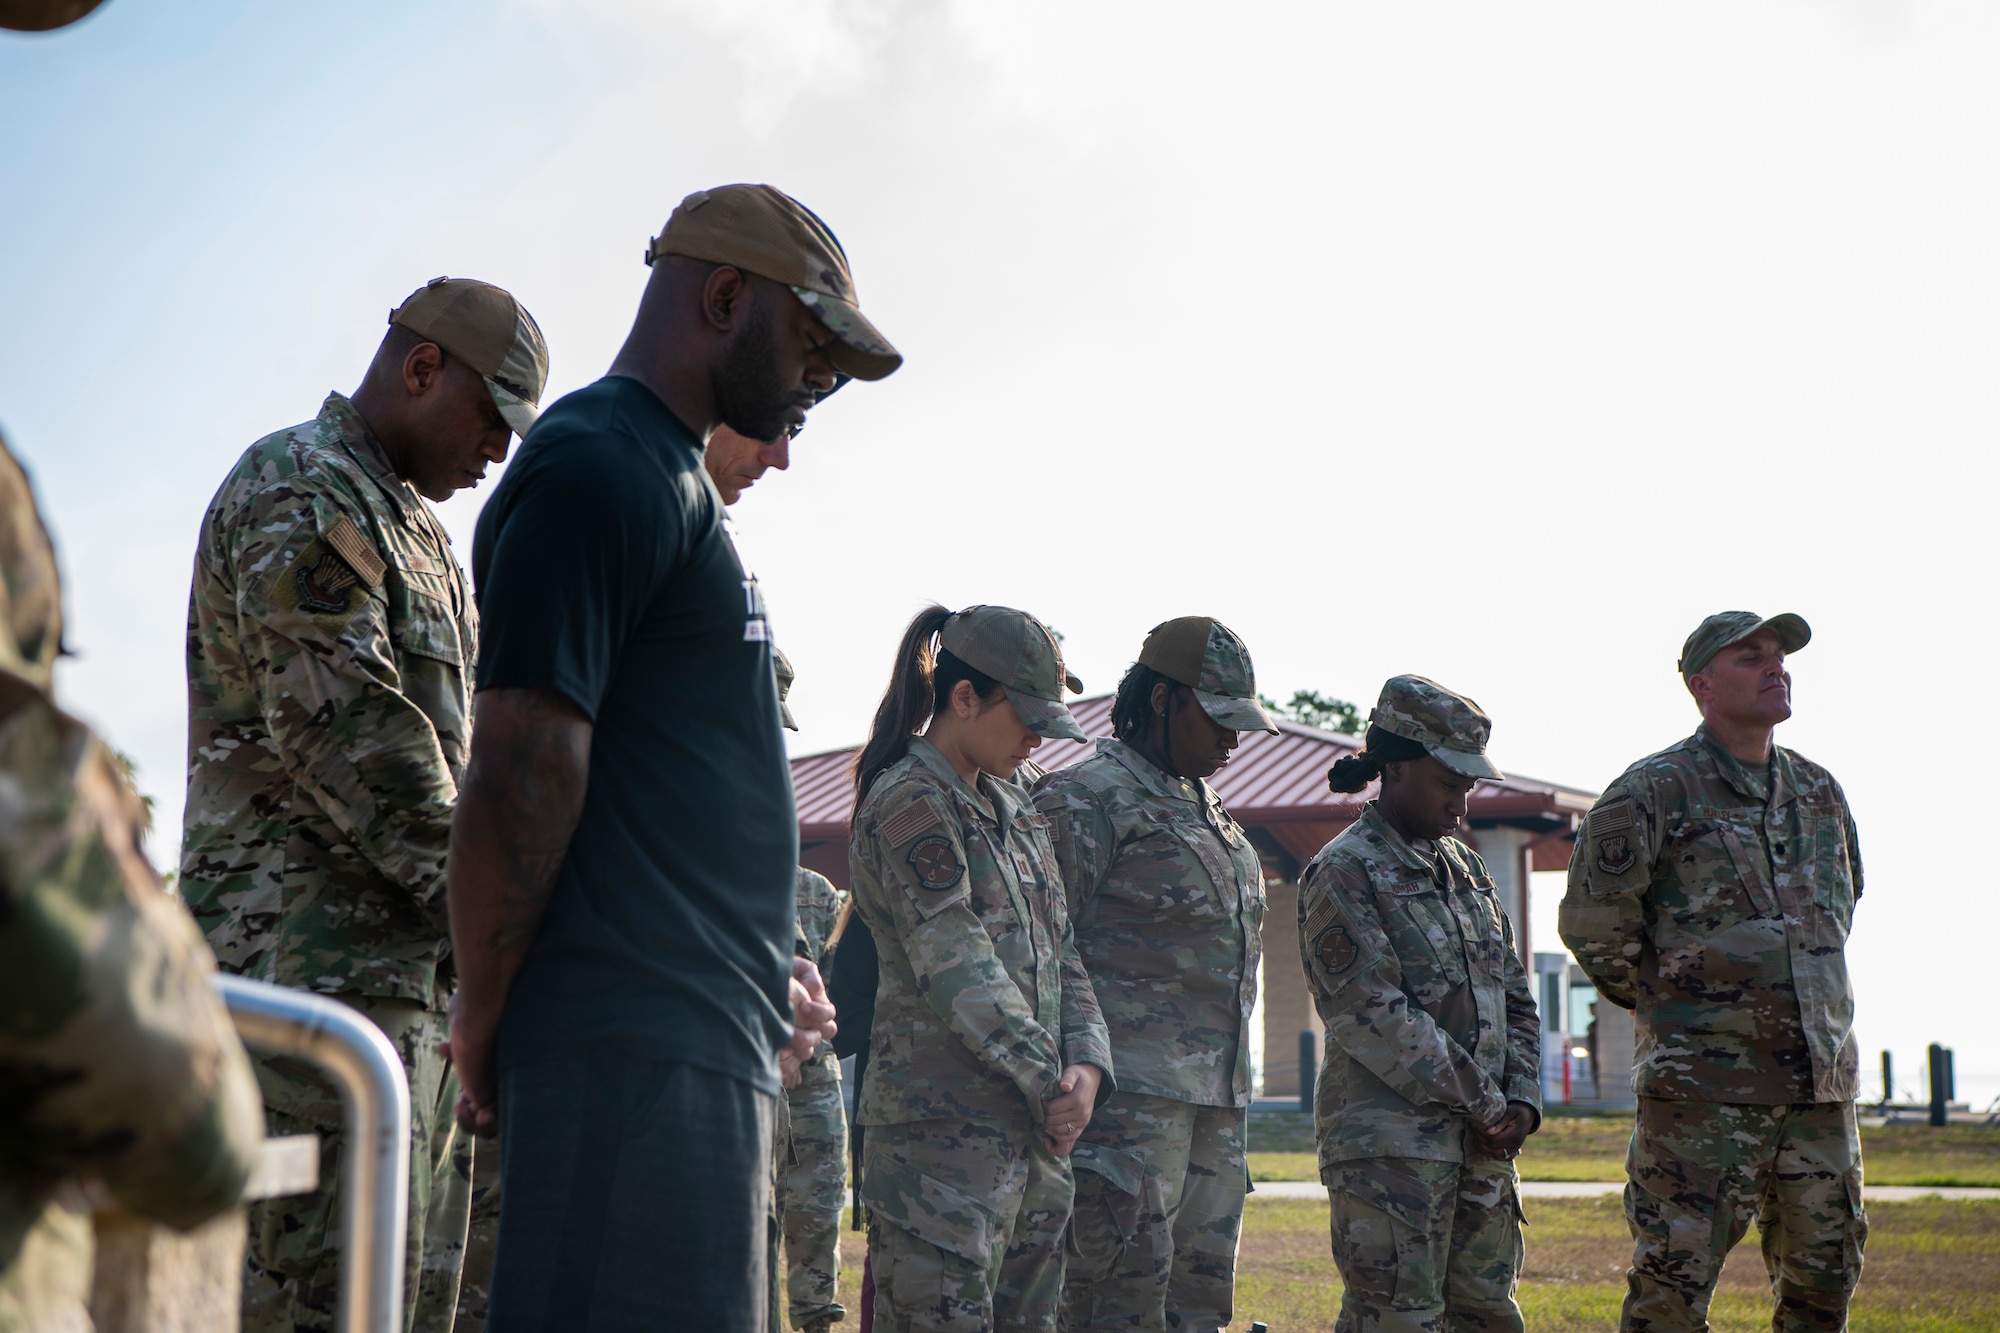 U.S. Air Force airmen assigned to the 6th Air Refueling Wing bow their heads during a prayer at MacDill Air Force Base, Florida, May 19, 2022.